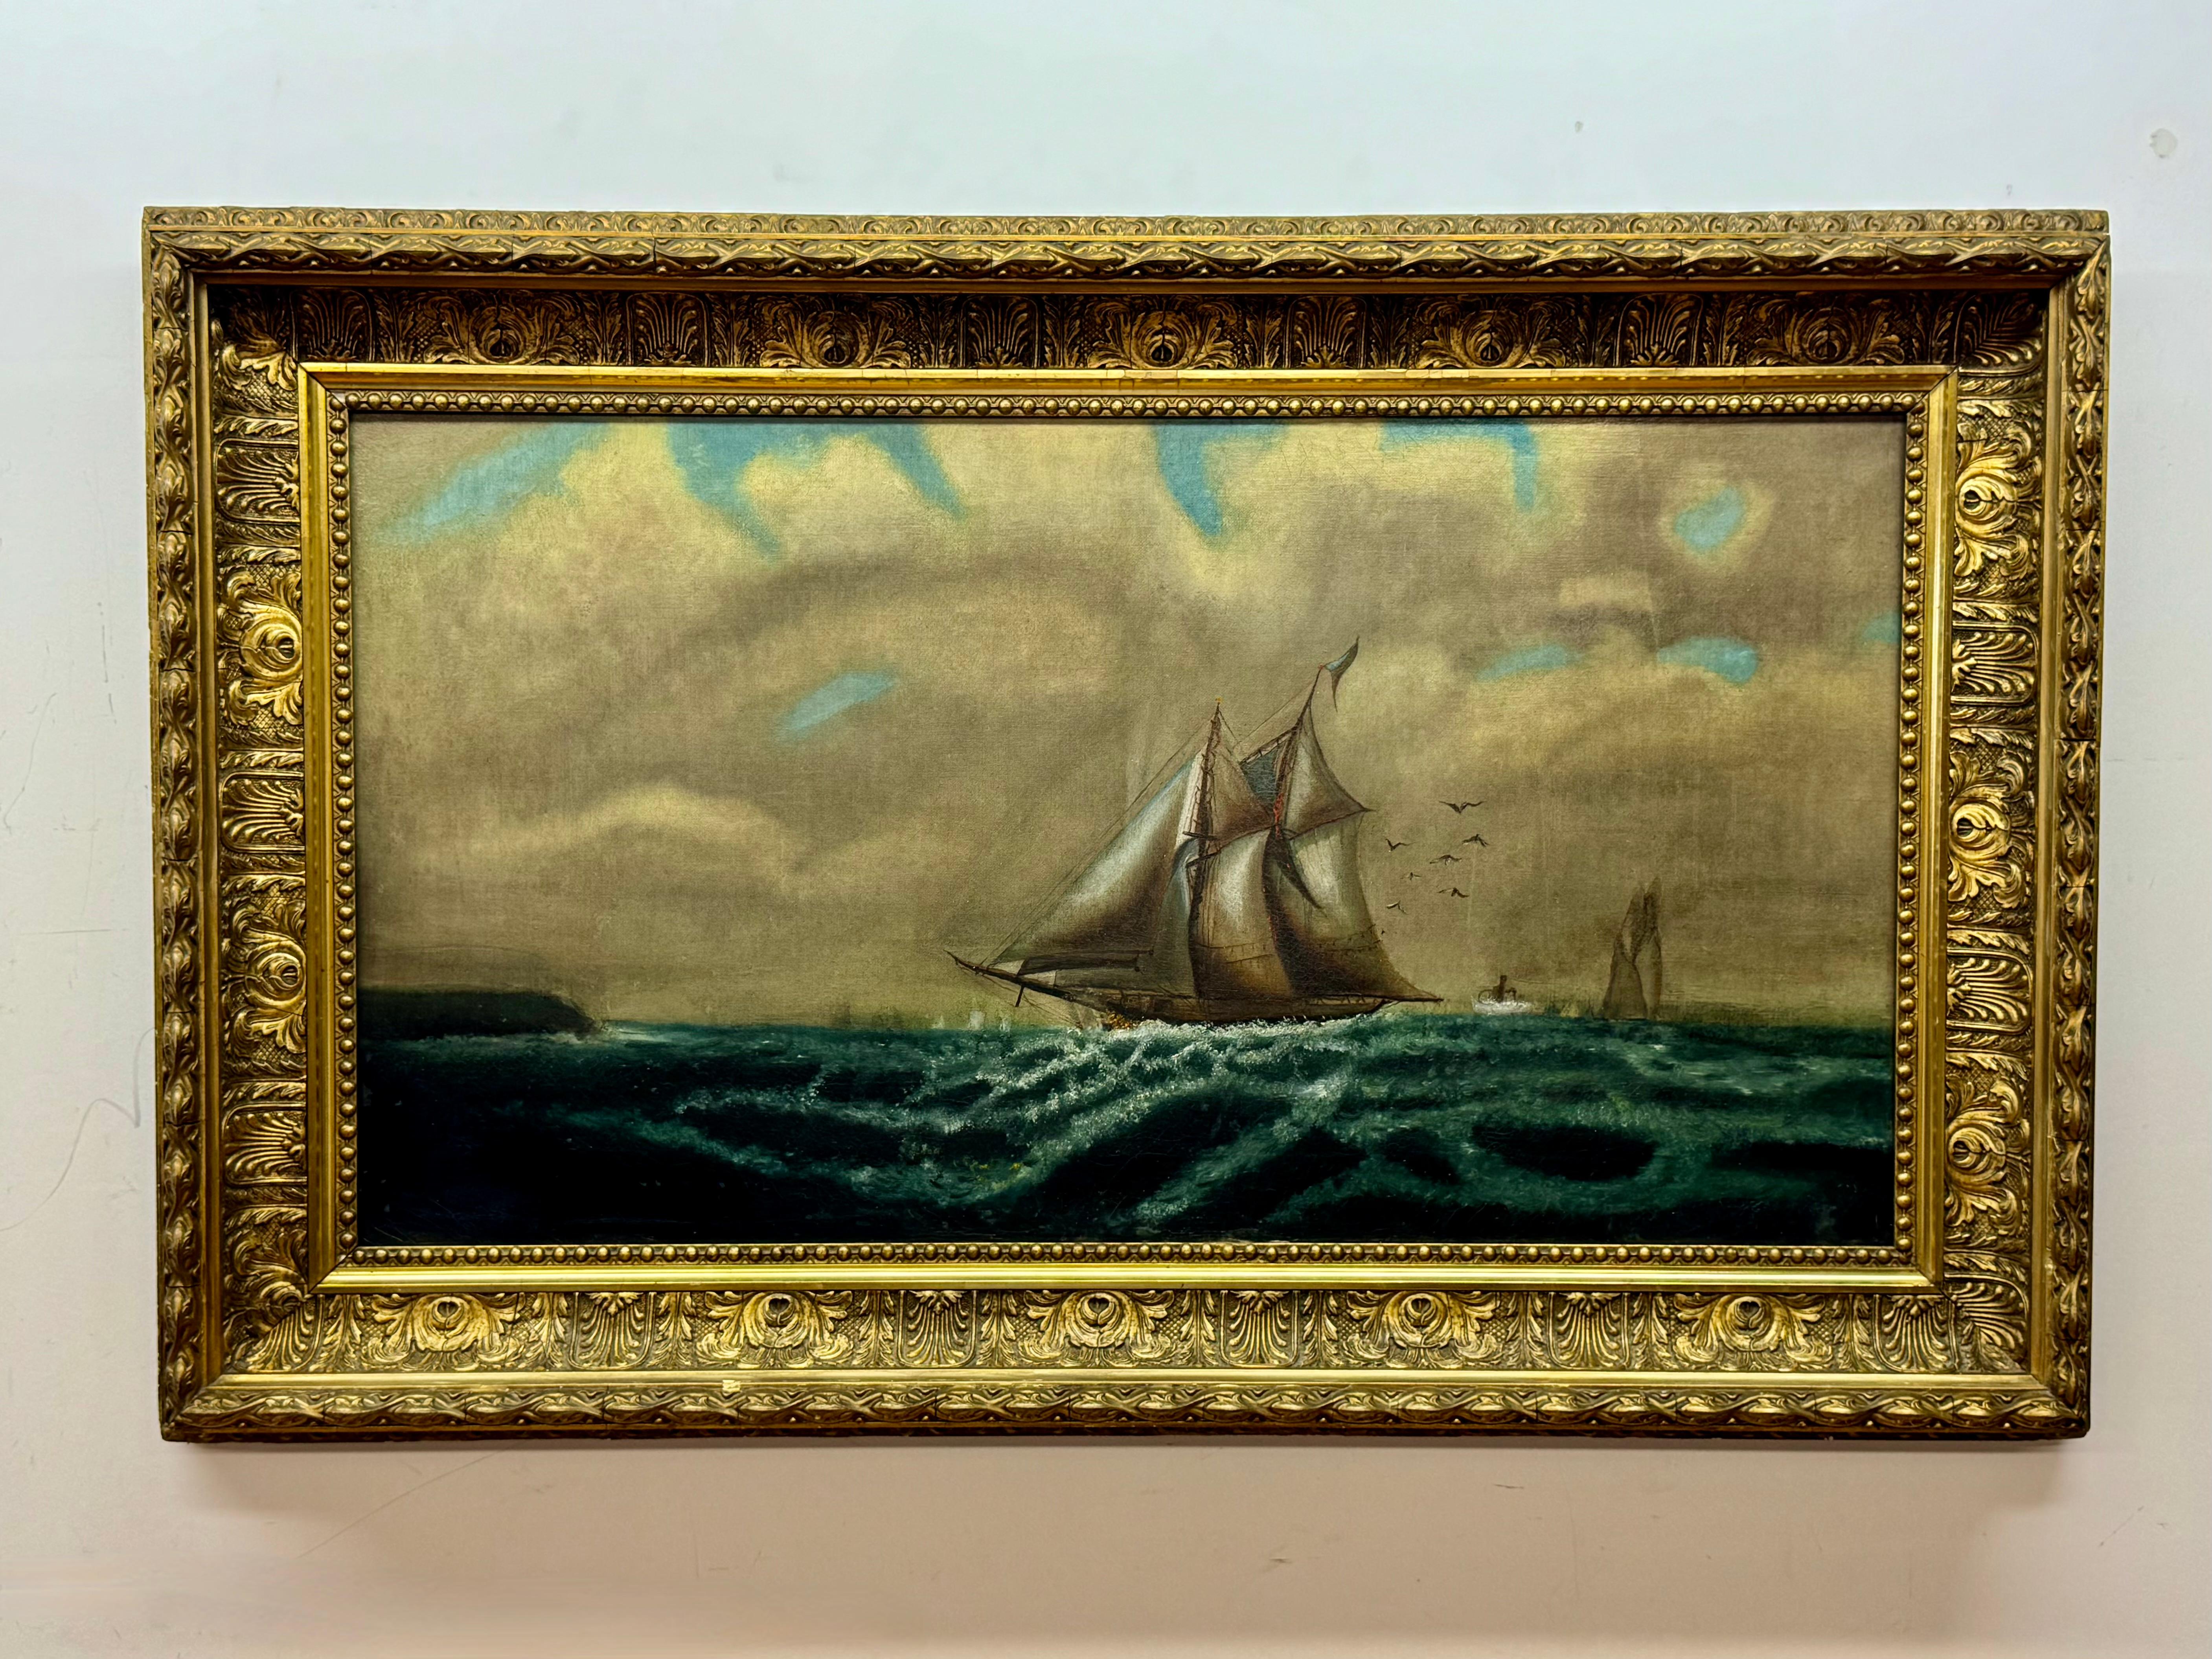 19 century Maritime painting with schooner at sea

No visible signature 

Restored

17.25 x 31.25 unframed, 24 x 38 framed